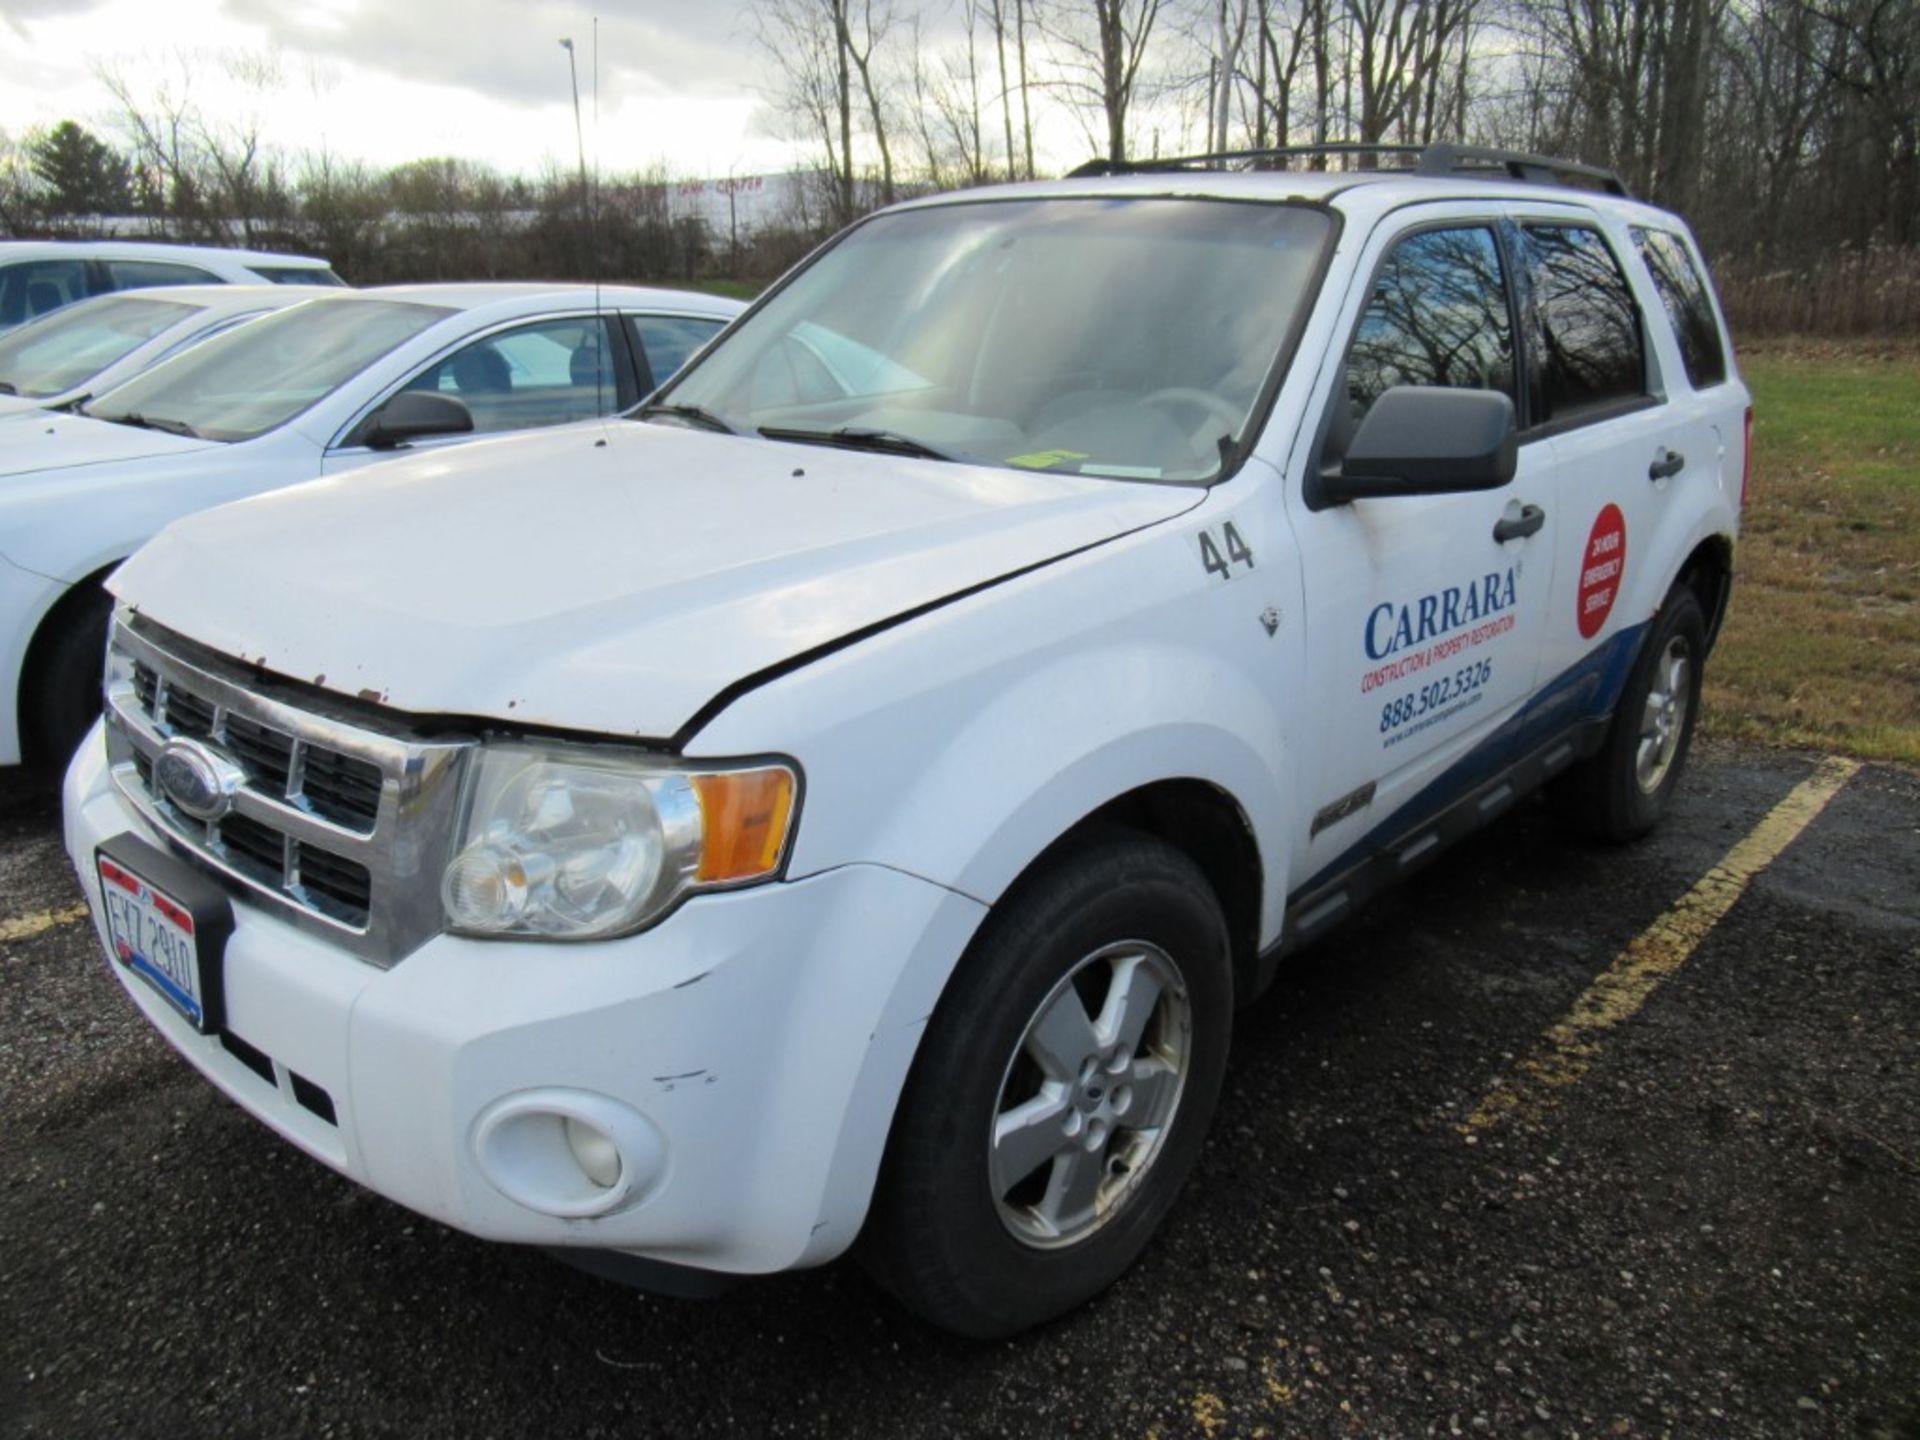 2008 Ford Escape XLT SUV , VIN 1FMCU02118KD90320, Automatic, Cruise Control, AC, PW, PL, PS, AM/FM/ - Image 2 of 31